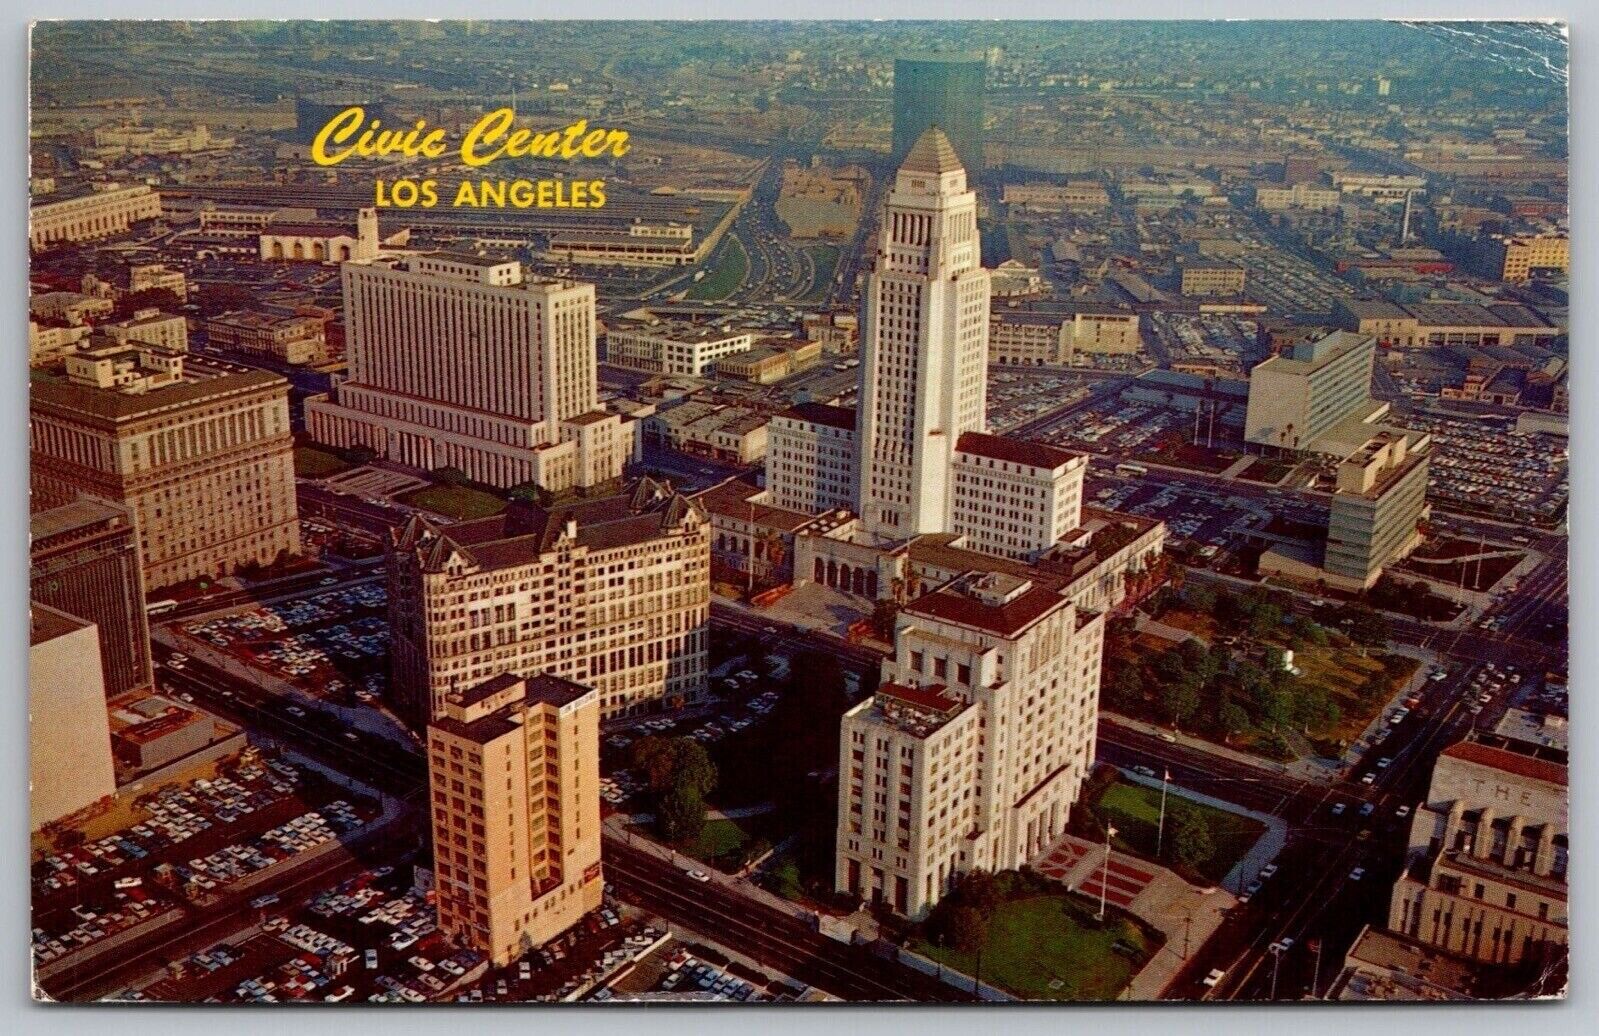 Civic Center Aerial View Los Angeles California Downtown Cancel 1964 PM Postcard